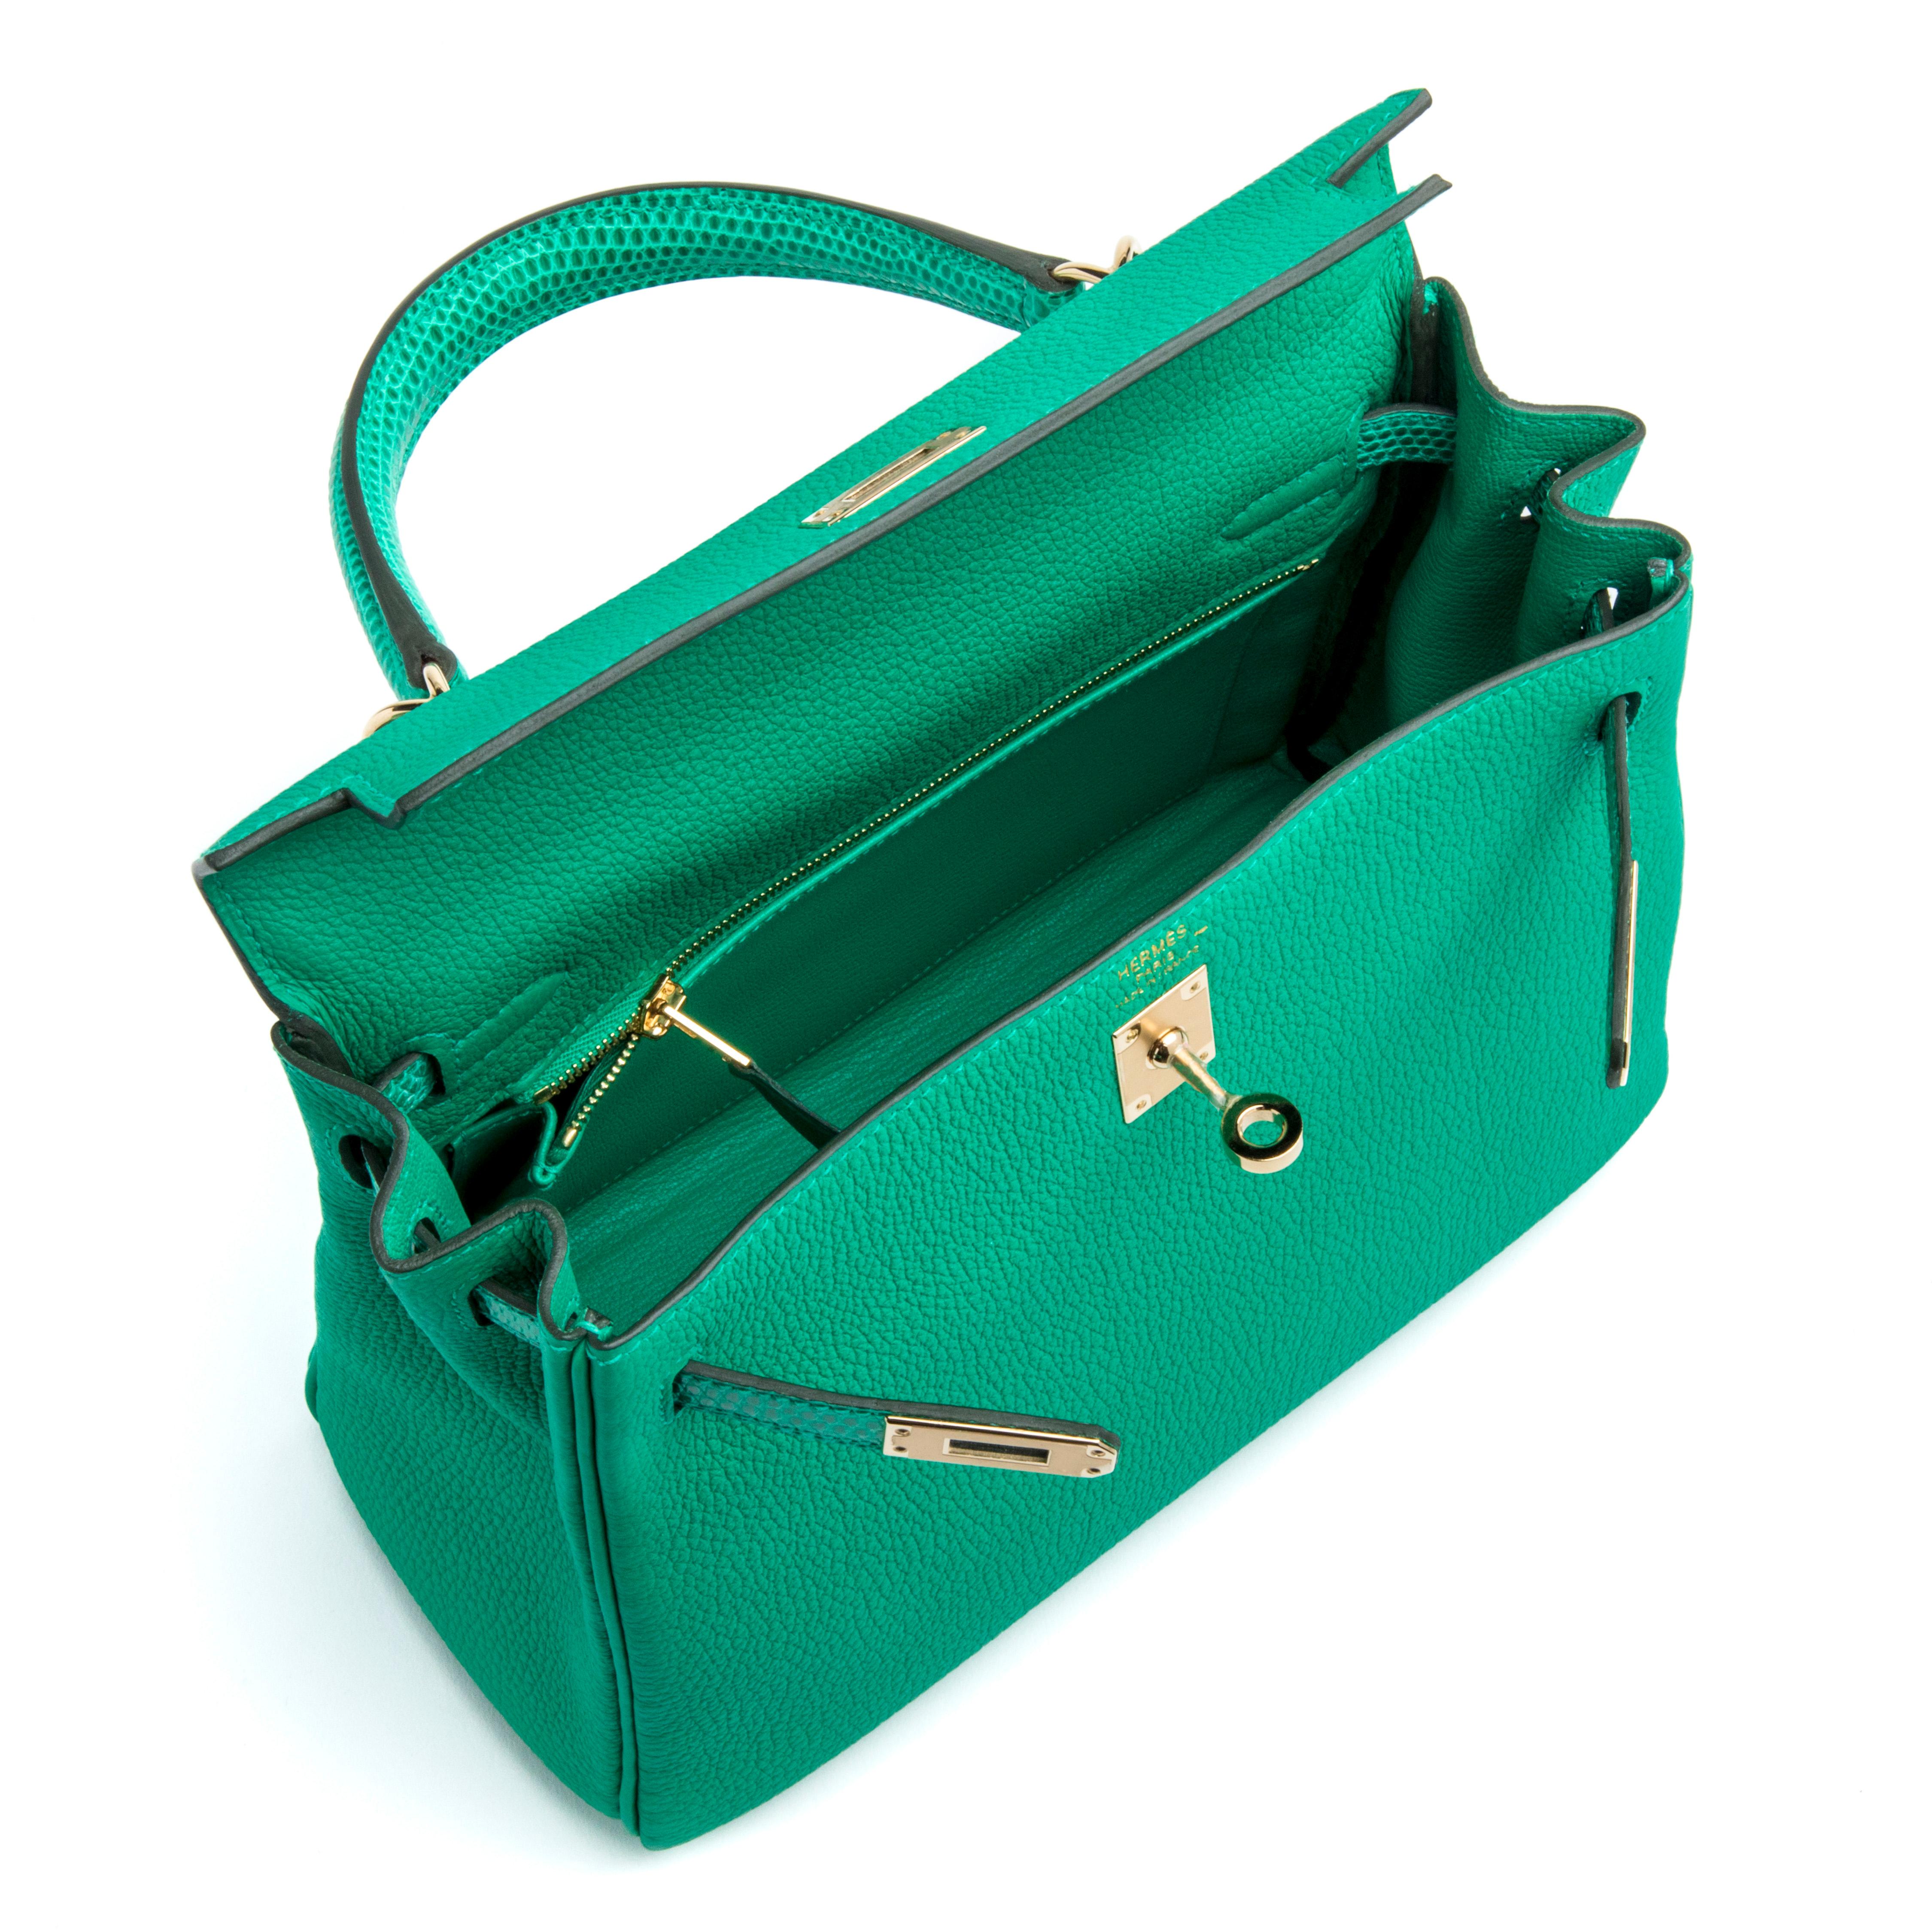 Hermes Vert Kelly 25cm with Lizard Trimming In Excellent Condition For Sale In New York, NY